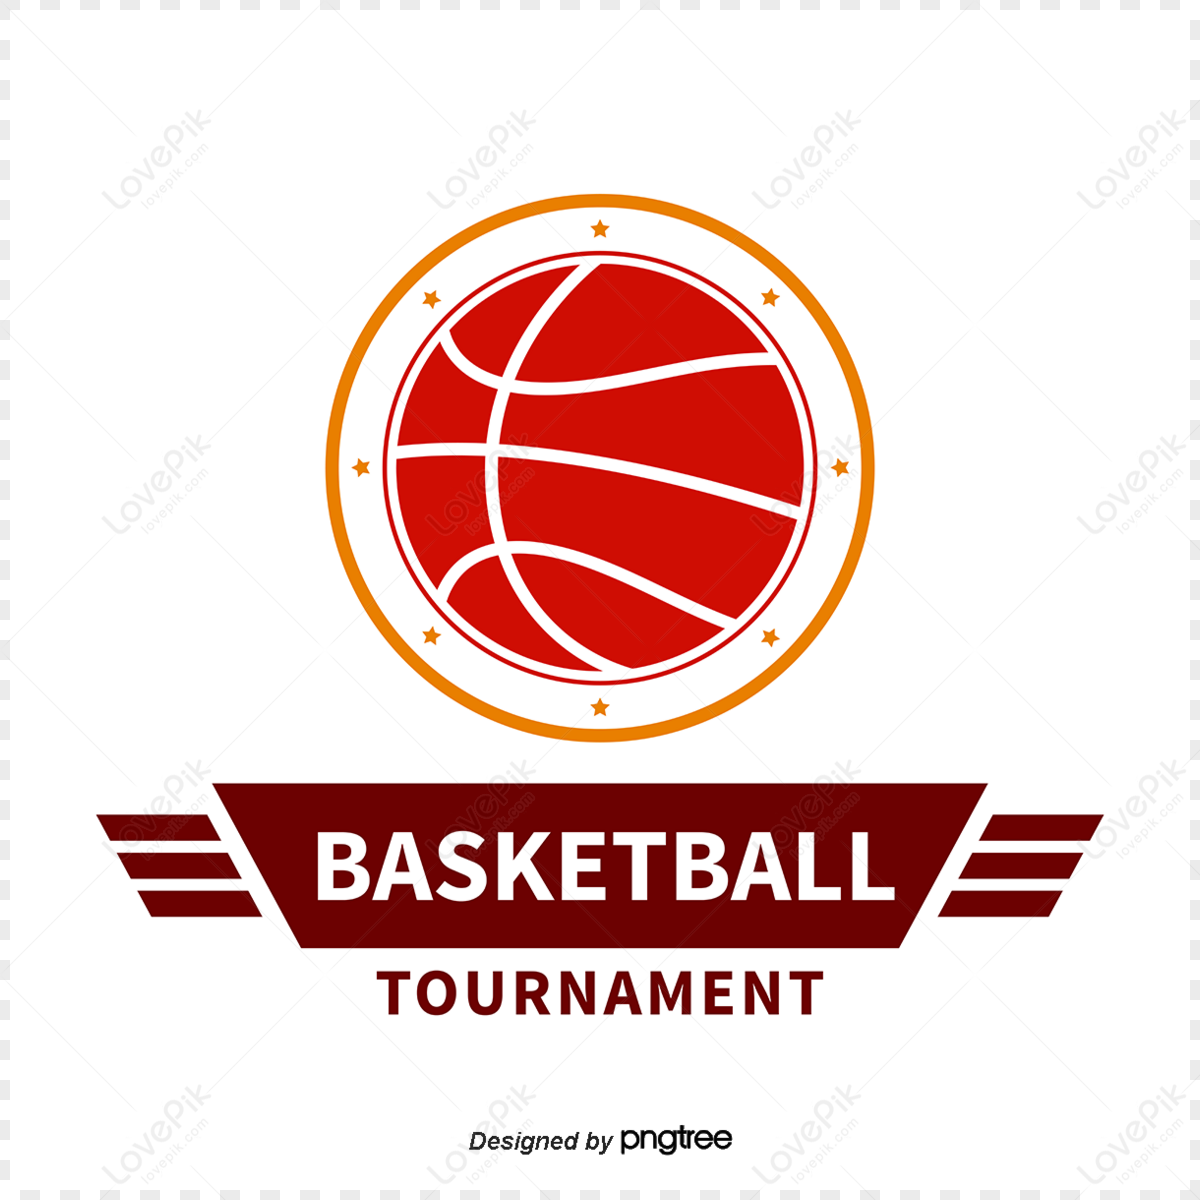 Championship Logo PNG Images With Transparent Background